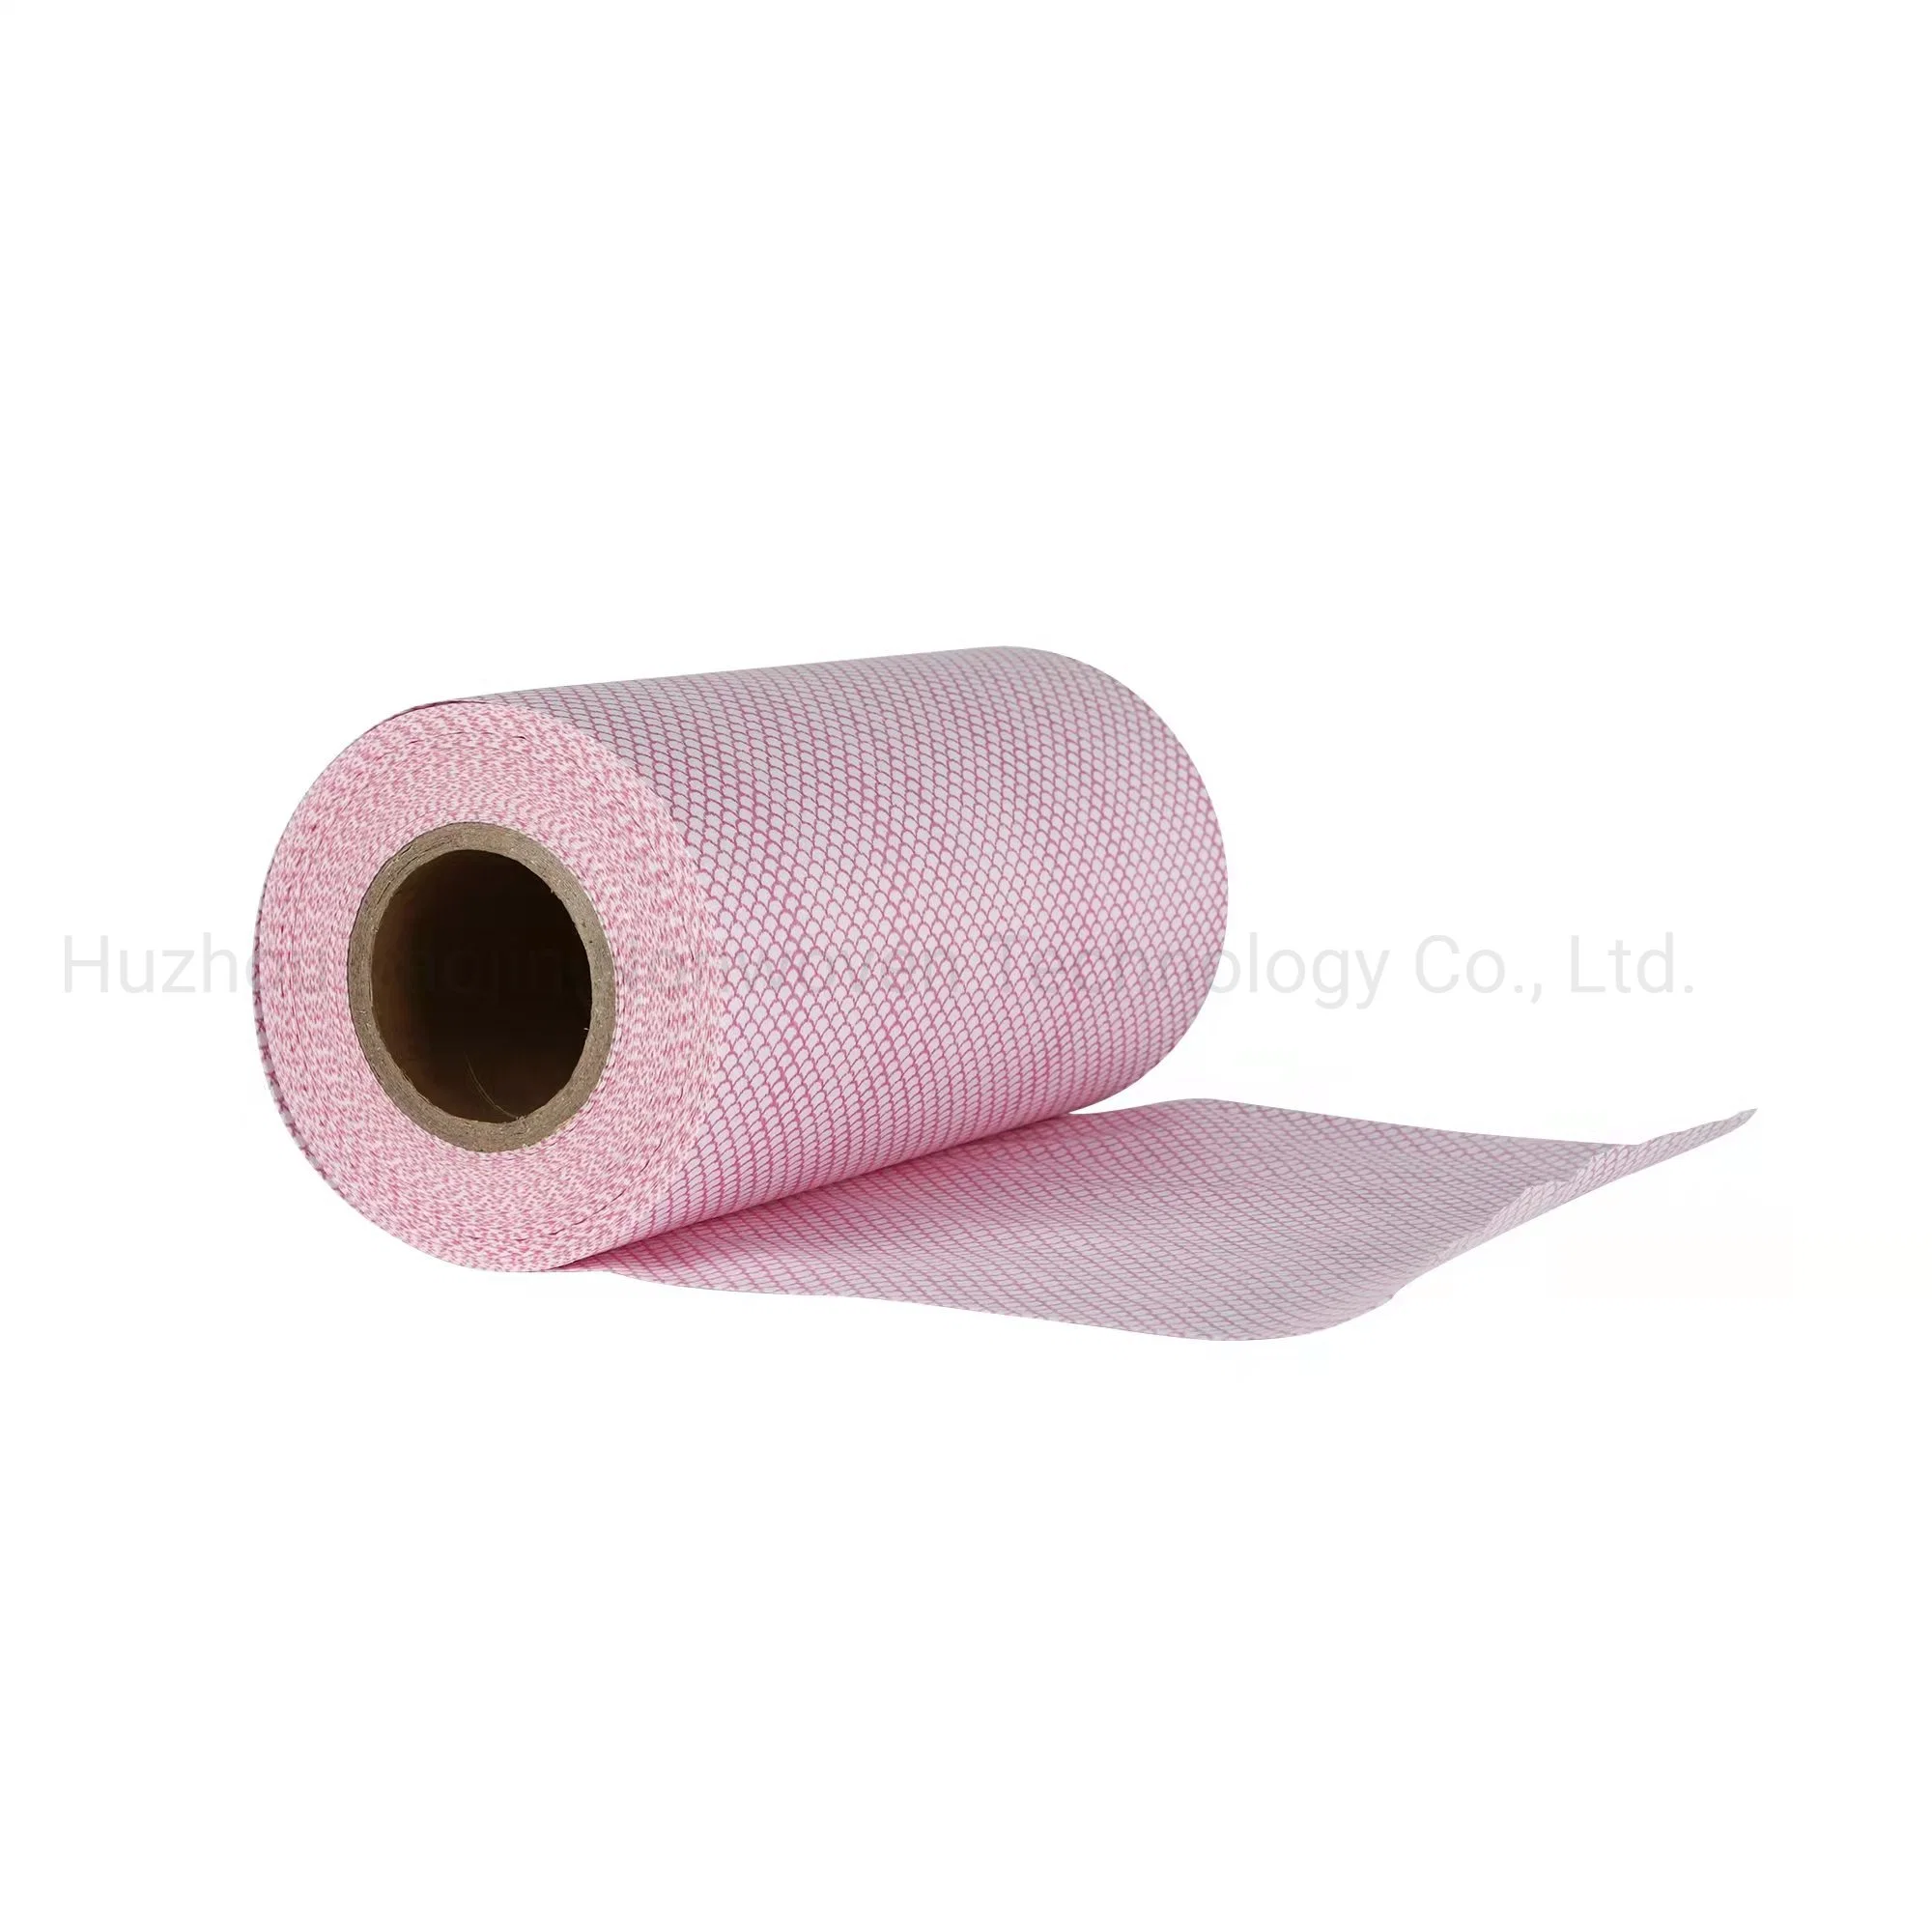 Non-Woven Fabric Super Absorbent Reusable Cotton Towels Industrial Cleaning Wipes Supplier